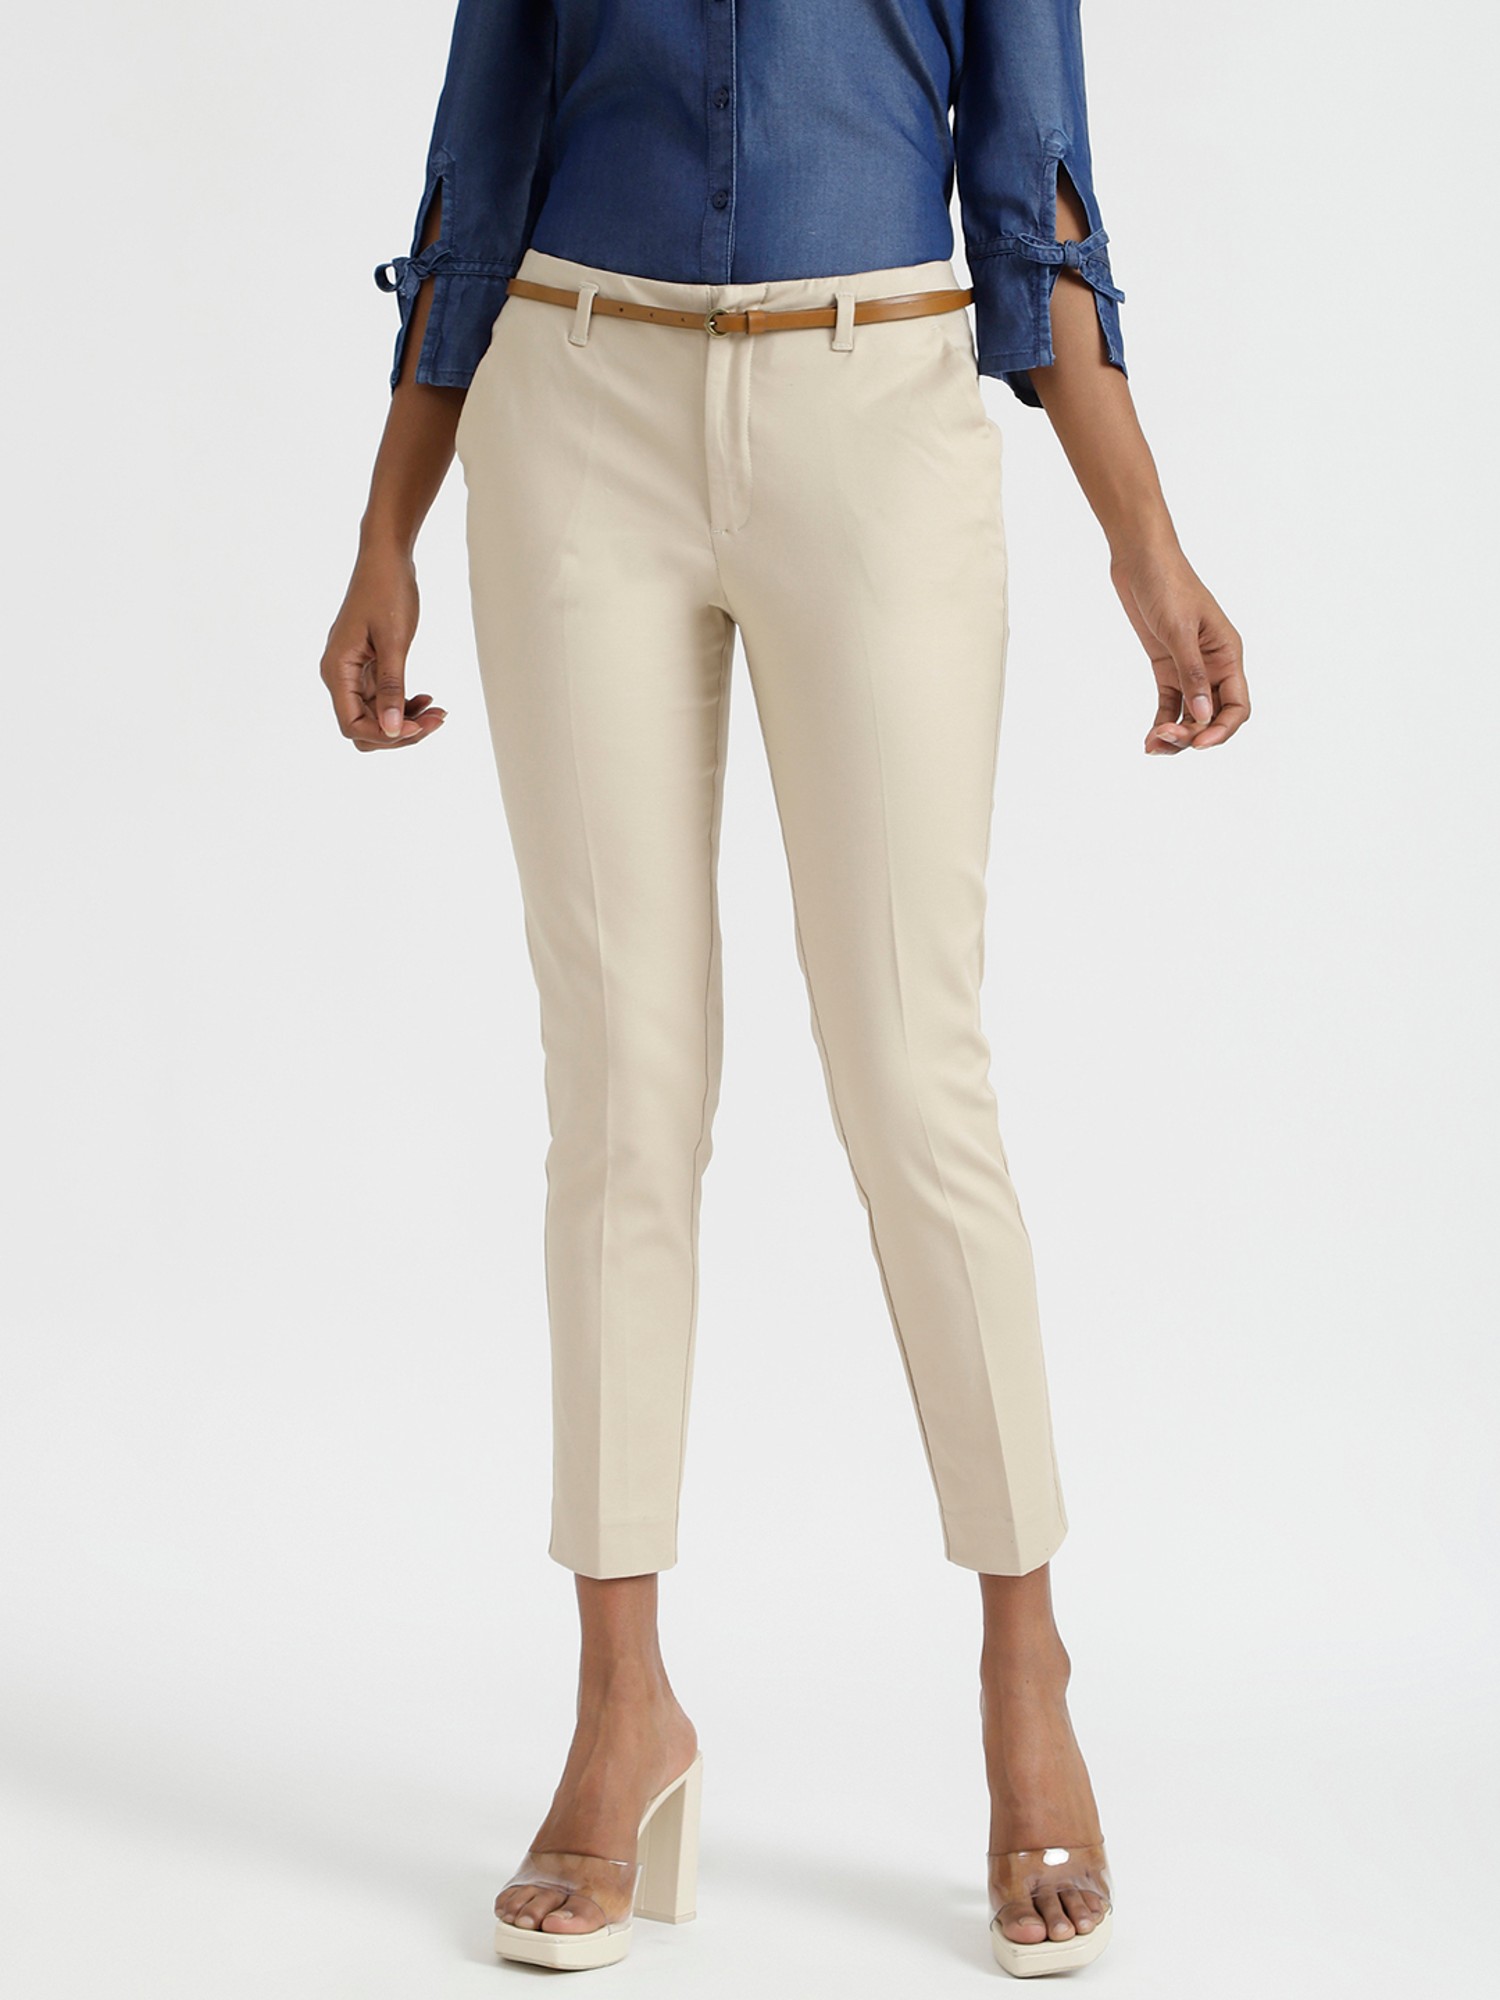 United Colors Of Benetton Trousers and Pants  Buy United Colors Of Benetton  Viscose Blend Orange Regular Length Women Trouser Online  Nykaa Fashion